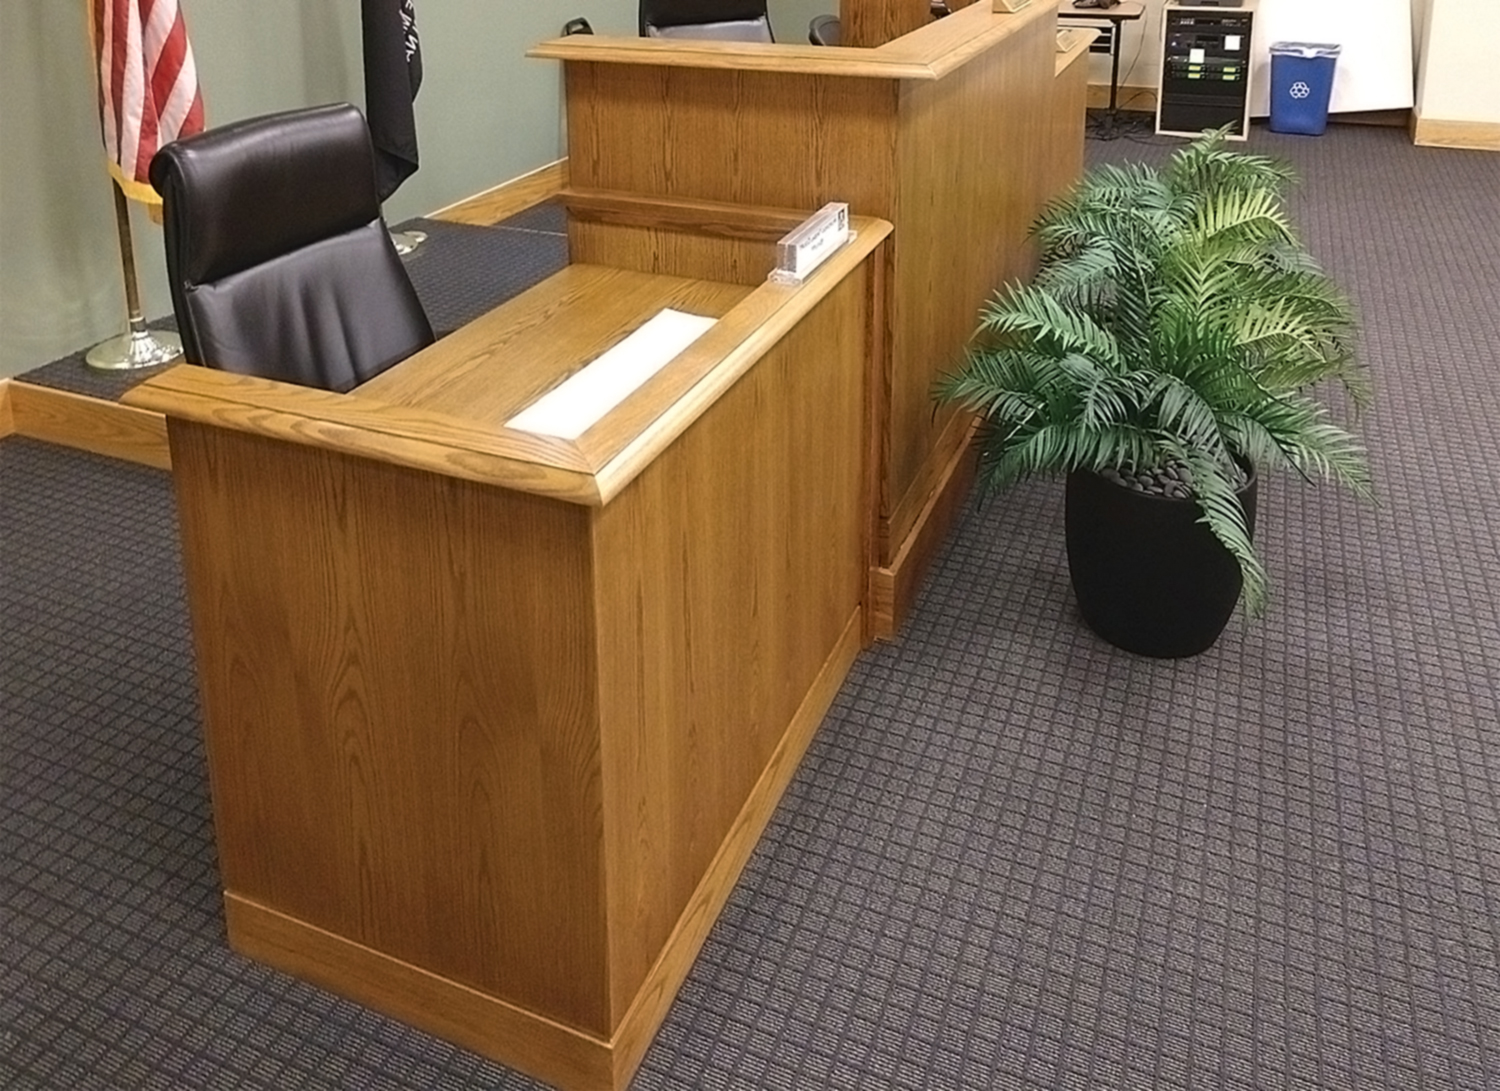 Witness Stand next to Judge's Bench